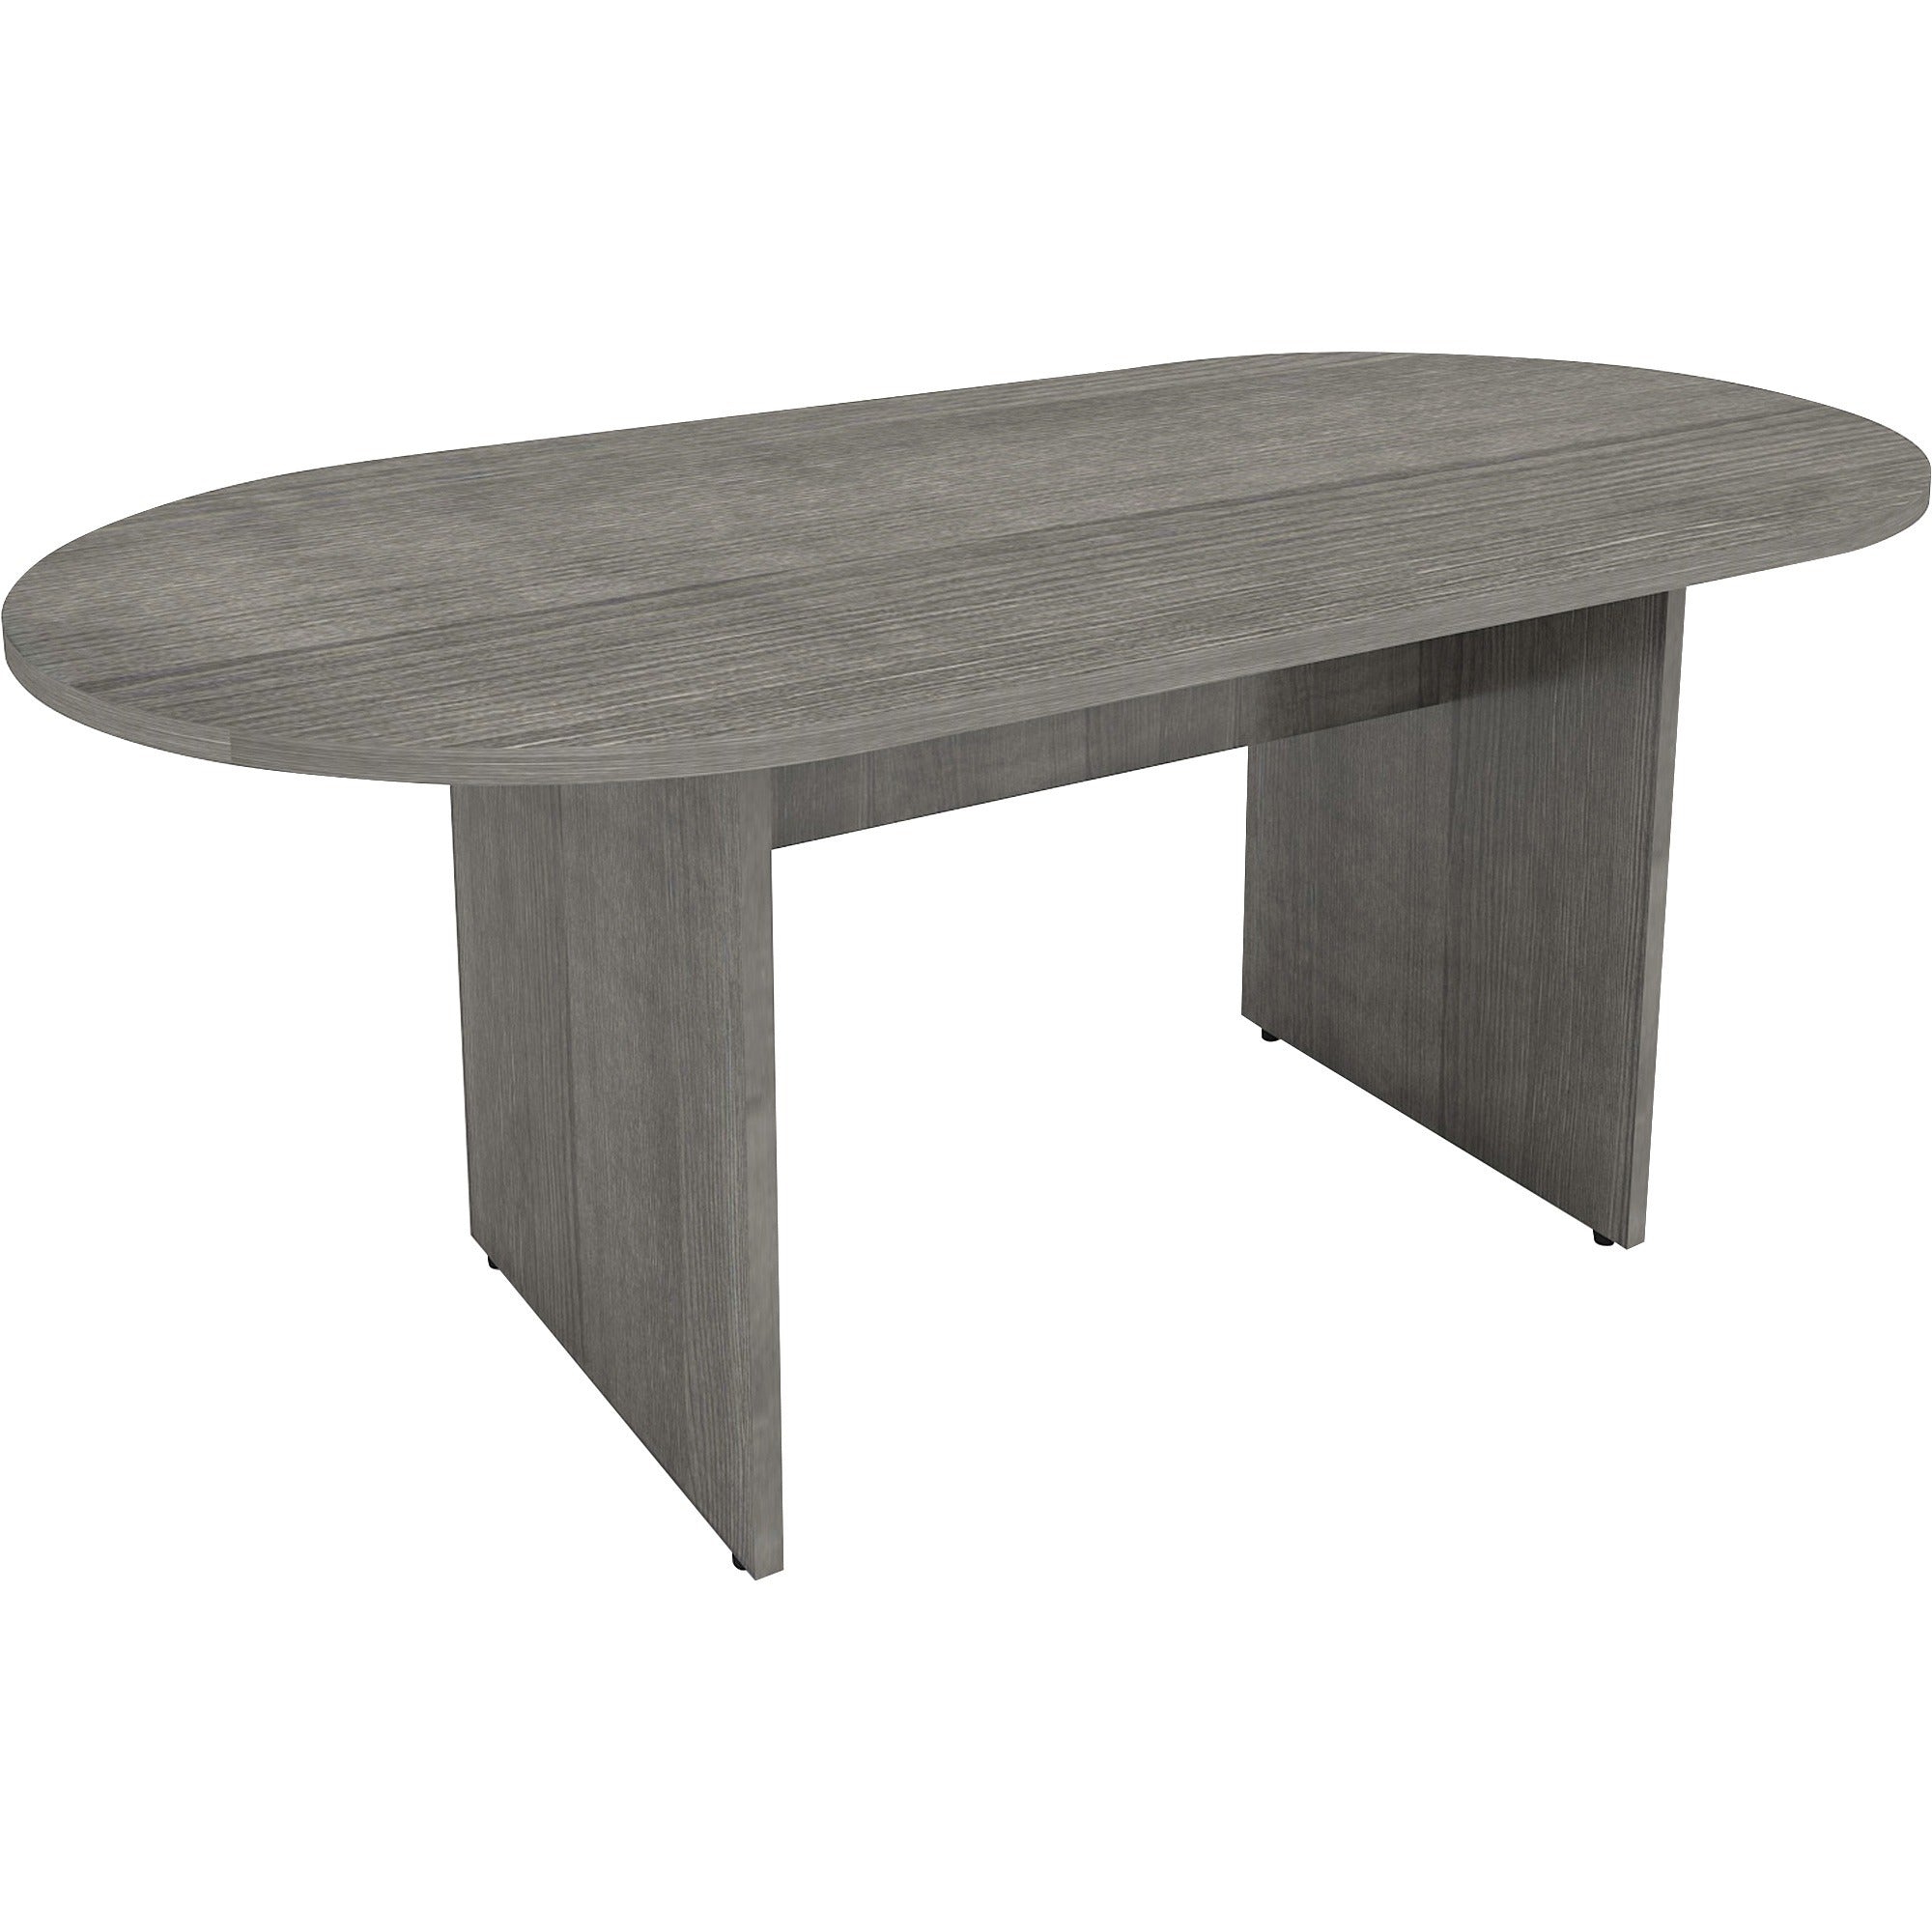 lorell-essentials-oval-conference-table-13-top-0-edge-72-x-29536-finish-weathered-charcoal-laminate_llr69569 - 1